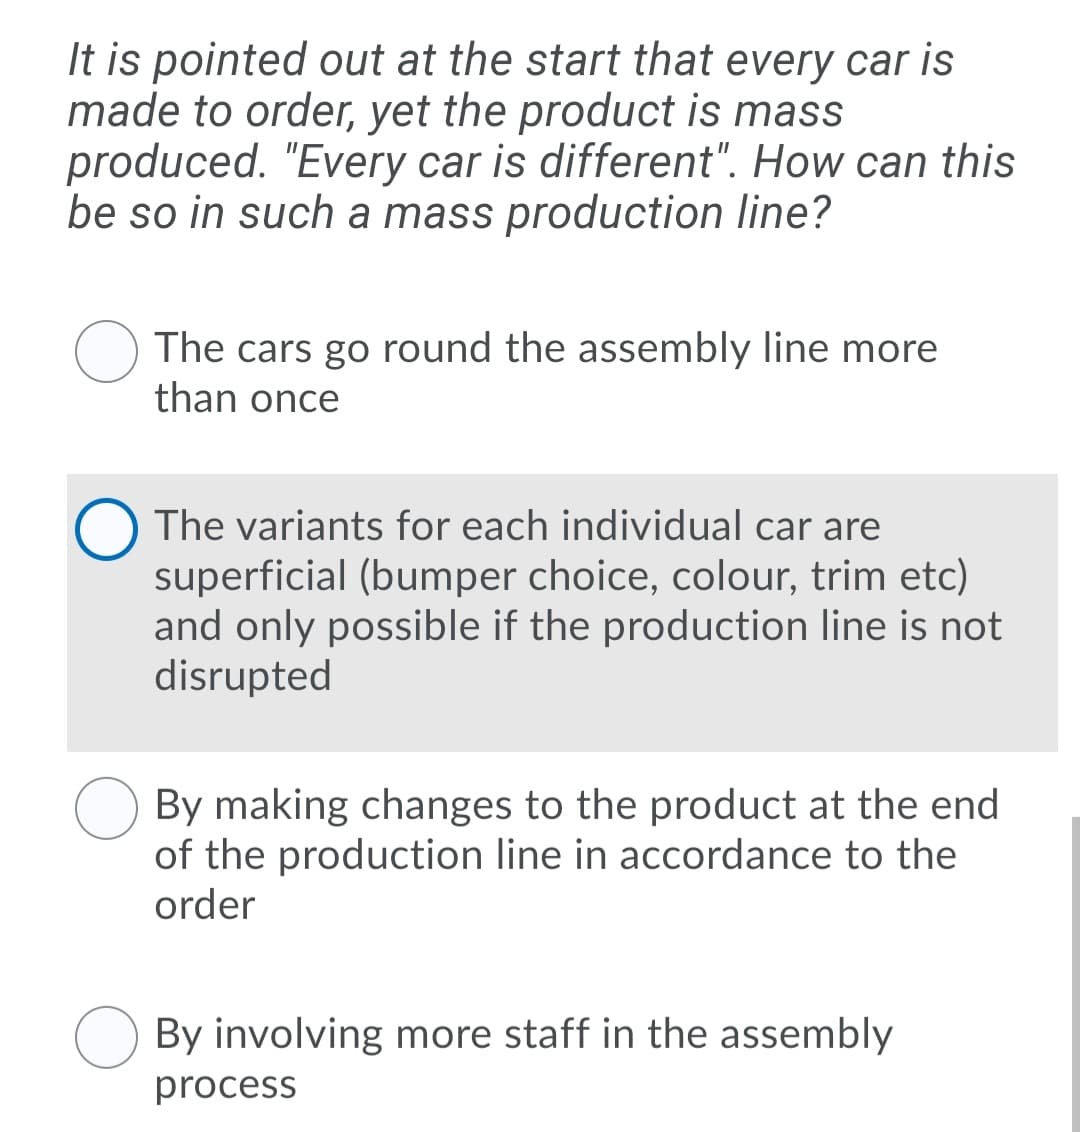 It is pointed out at the start that every car is
made to order, yet the product is mass
produced. "Every car is different". How can this
be so in such a mass production line?
O The cars go round the assembly line more
than once
The variants for each individual car are
superficial (bumper choice, colour, trim etc)
and only possible if the production line is not
disrupted
By making changes to the product at the end
of the production line in accordance to the
order
By involving more staff in the assembly
process
